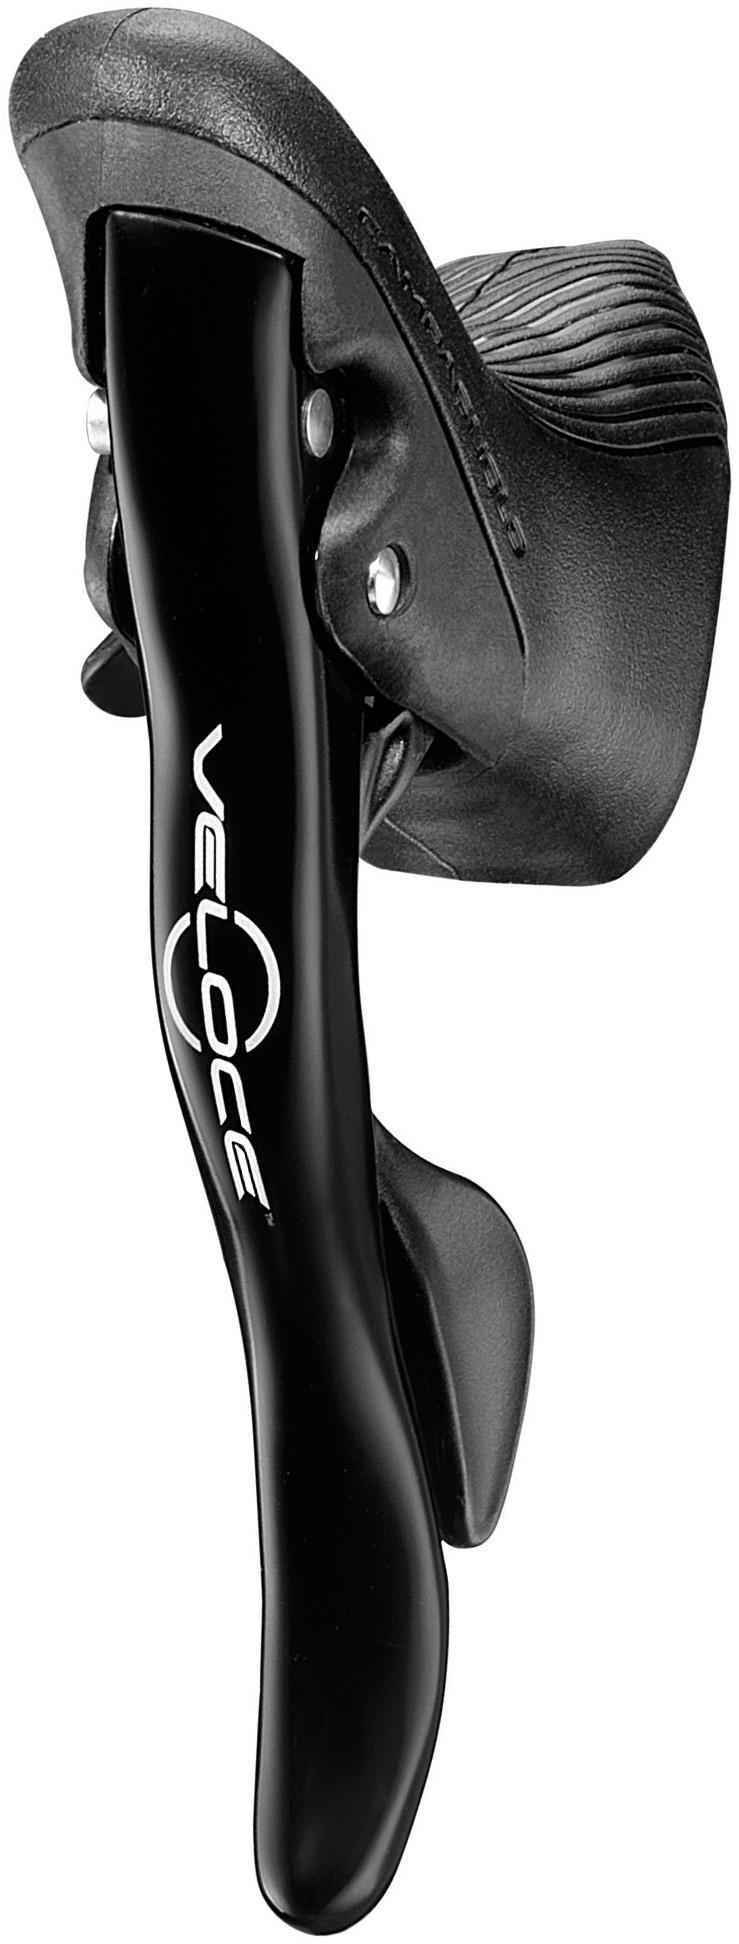 Campagnolo Veloce Power Shift 10 Speed Levers - Black